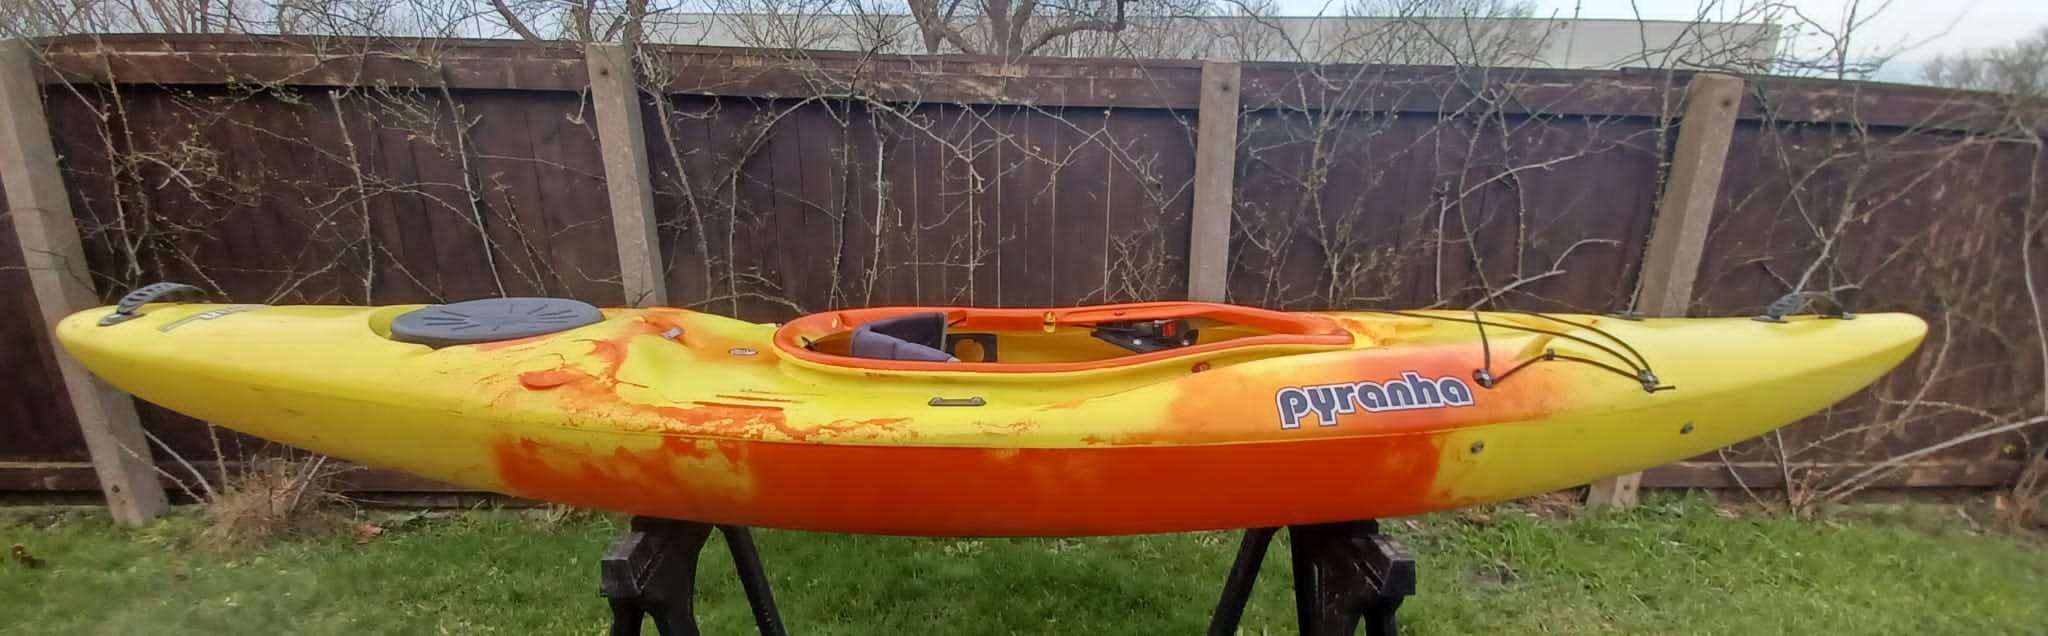 A kayak on a stand

Description automatically generated